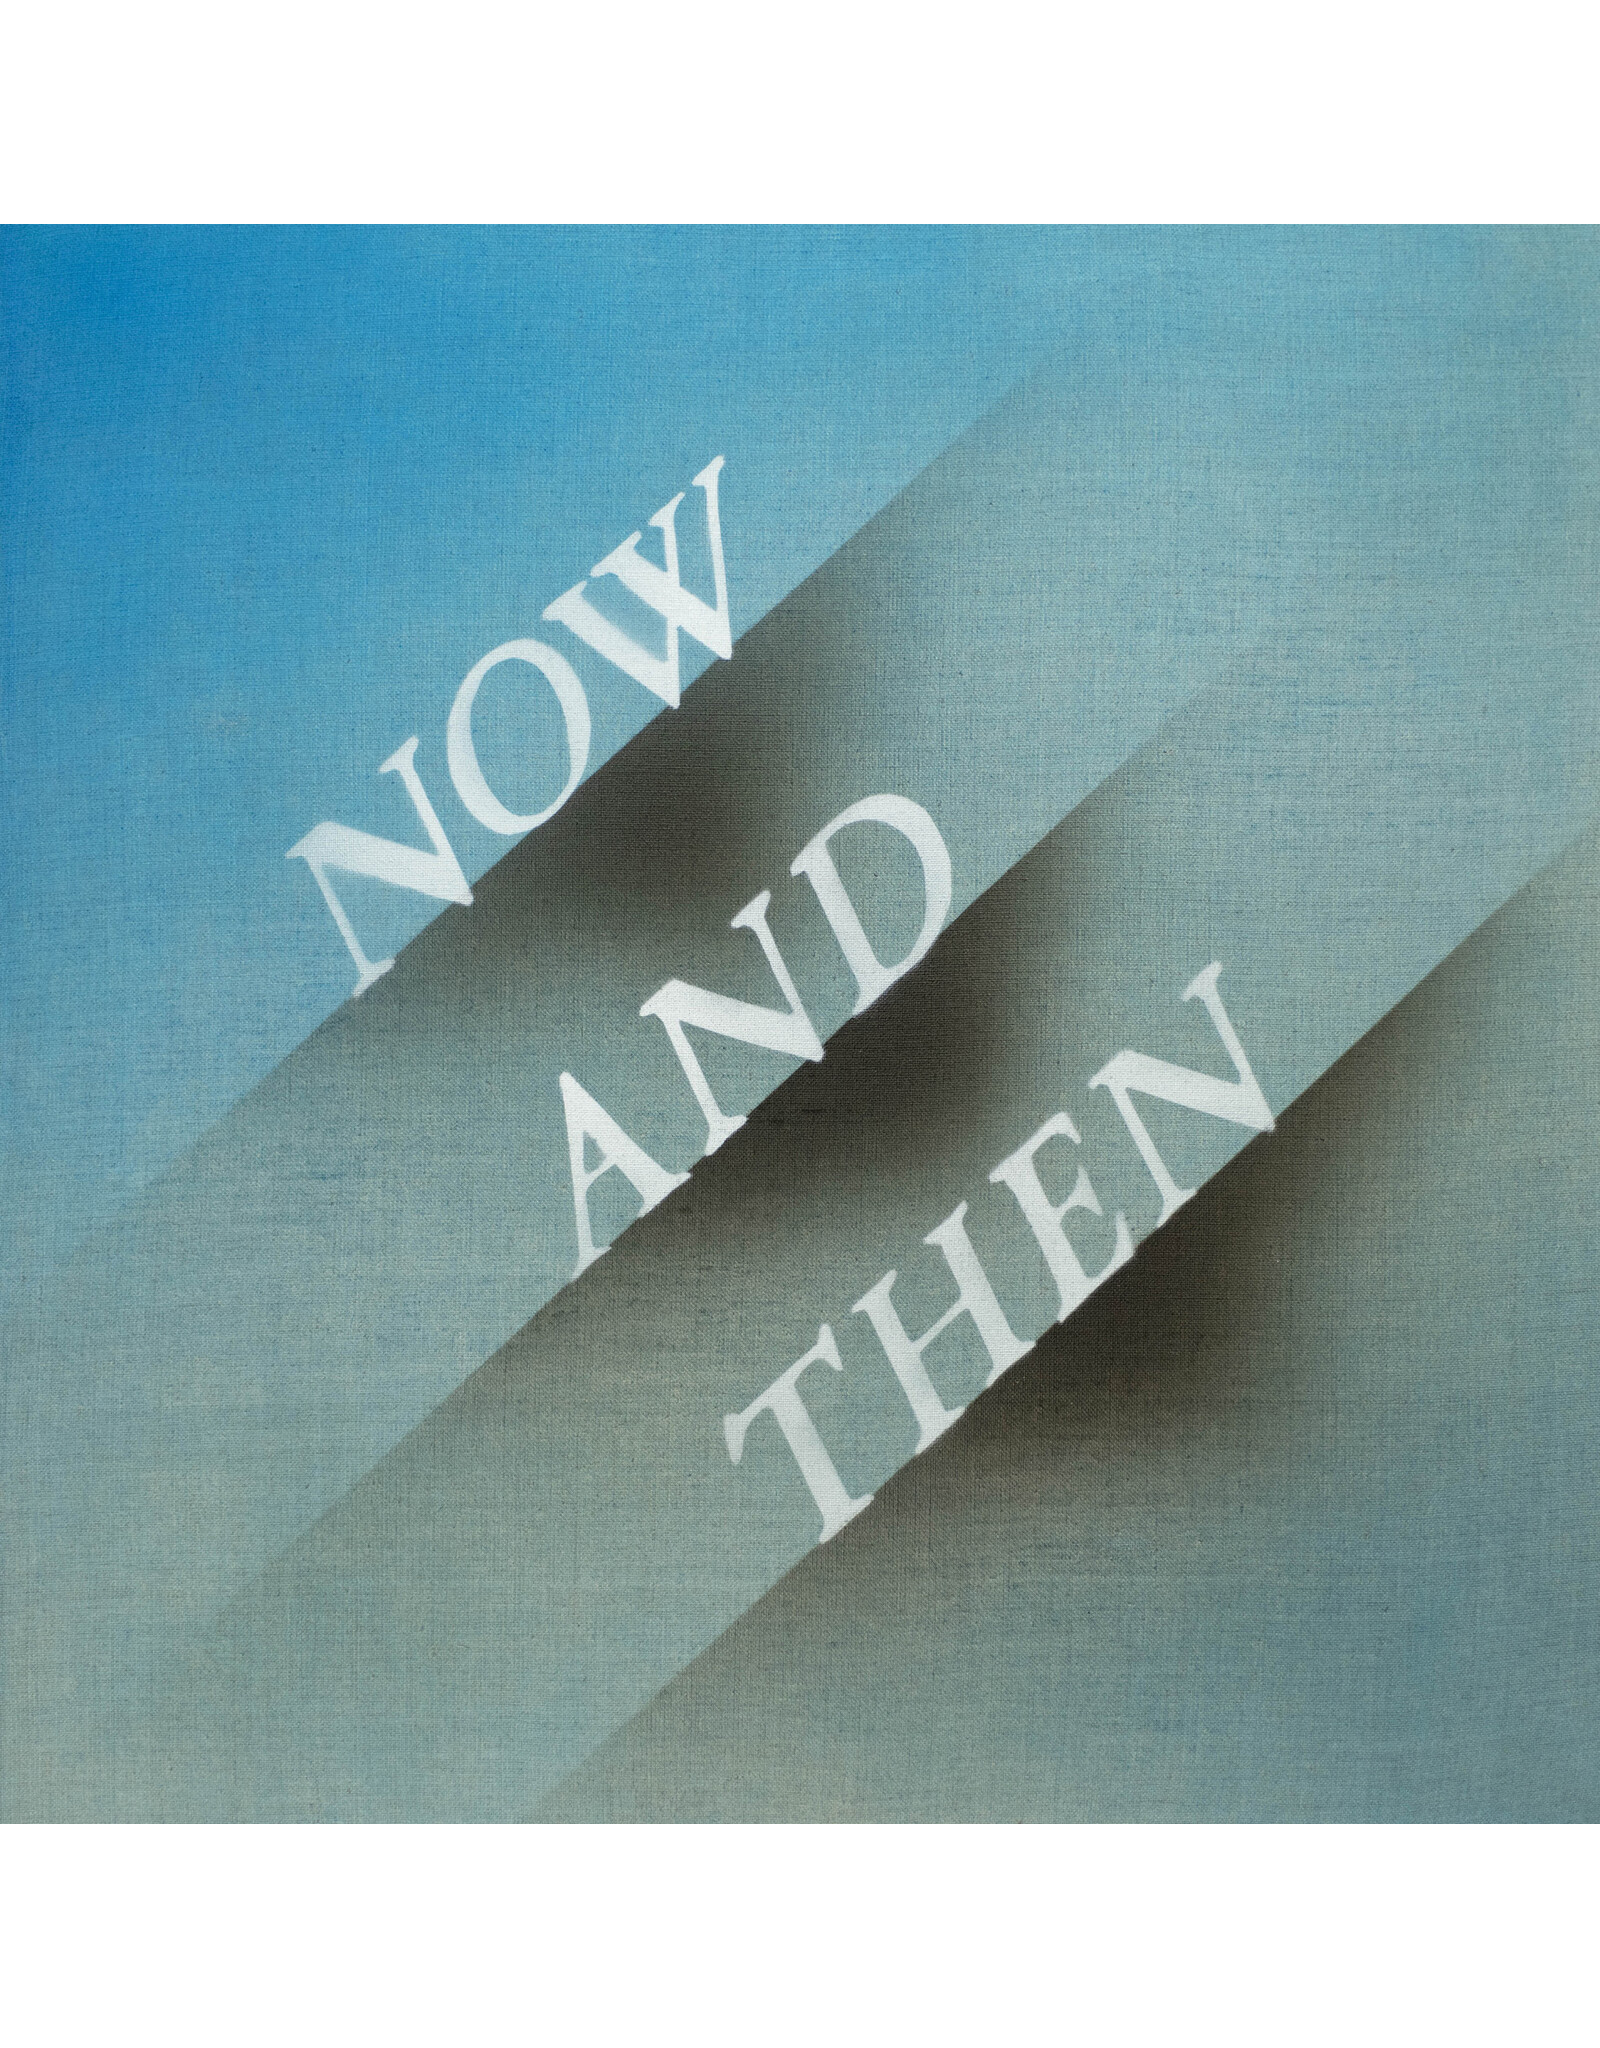 Beatles - Now And Then (7" Single) [Blue Vinyl]